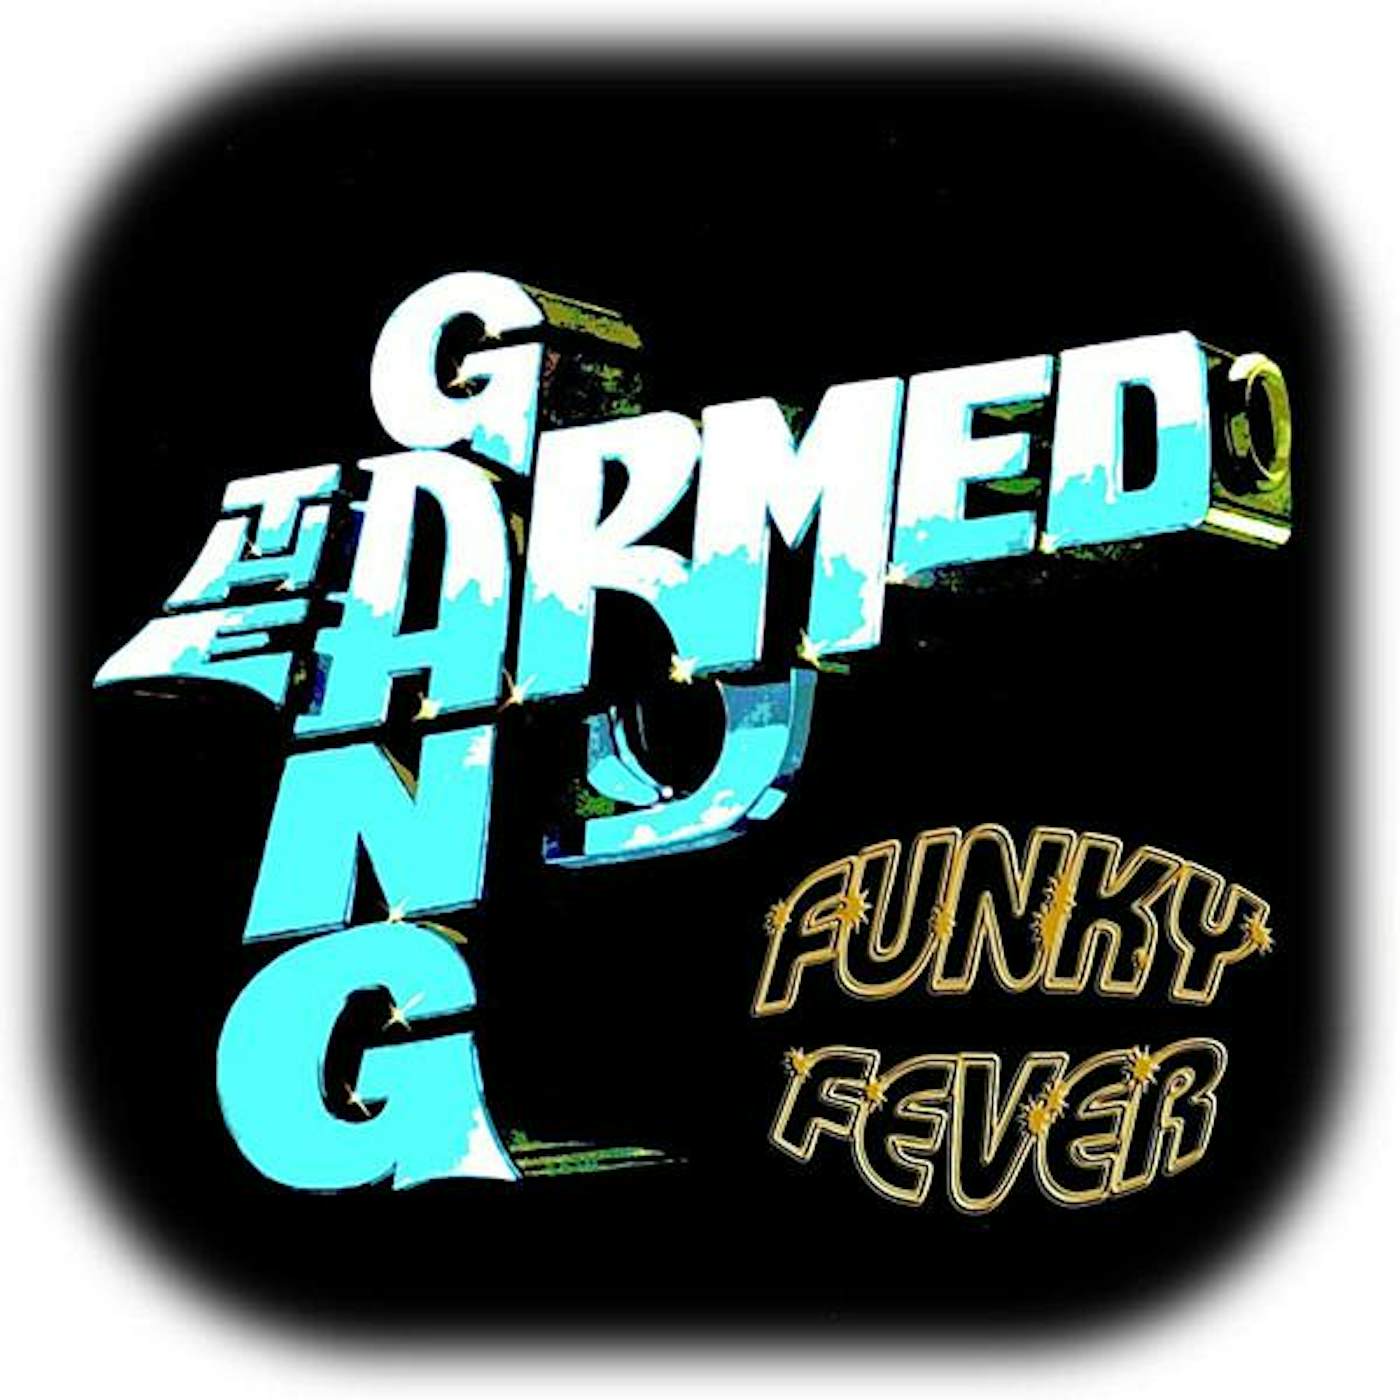 The Armed Gang